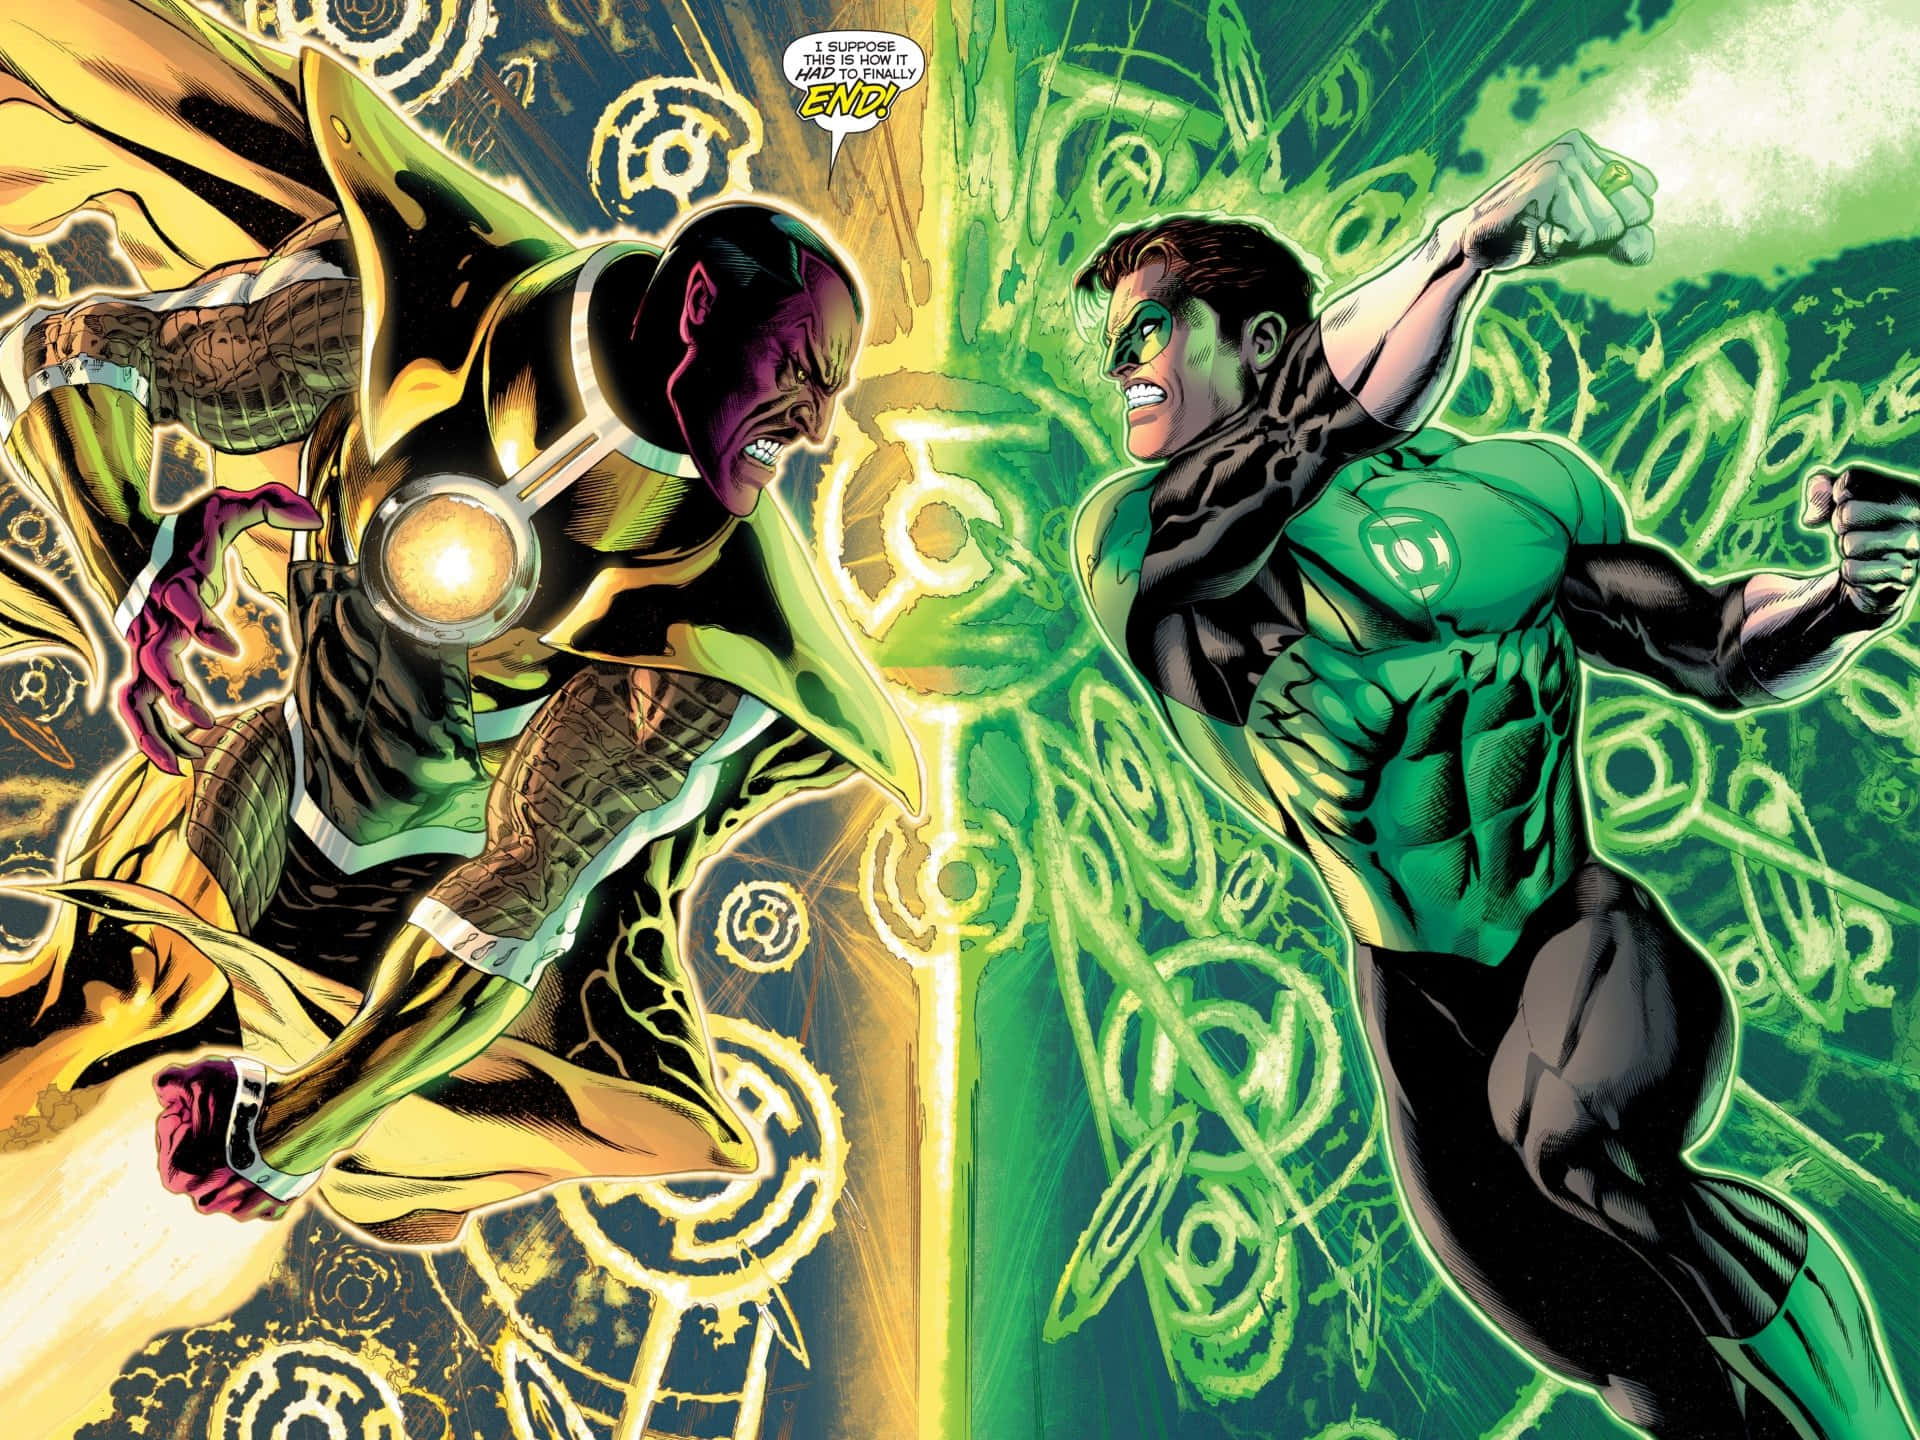 “Standing guard against evil forces, the Green Lantern is prepared to protect.”